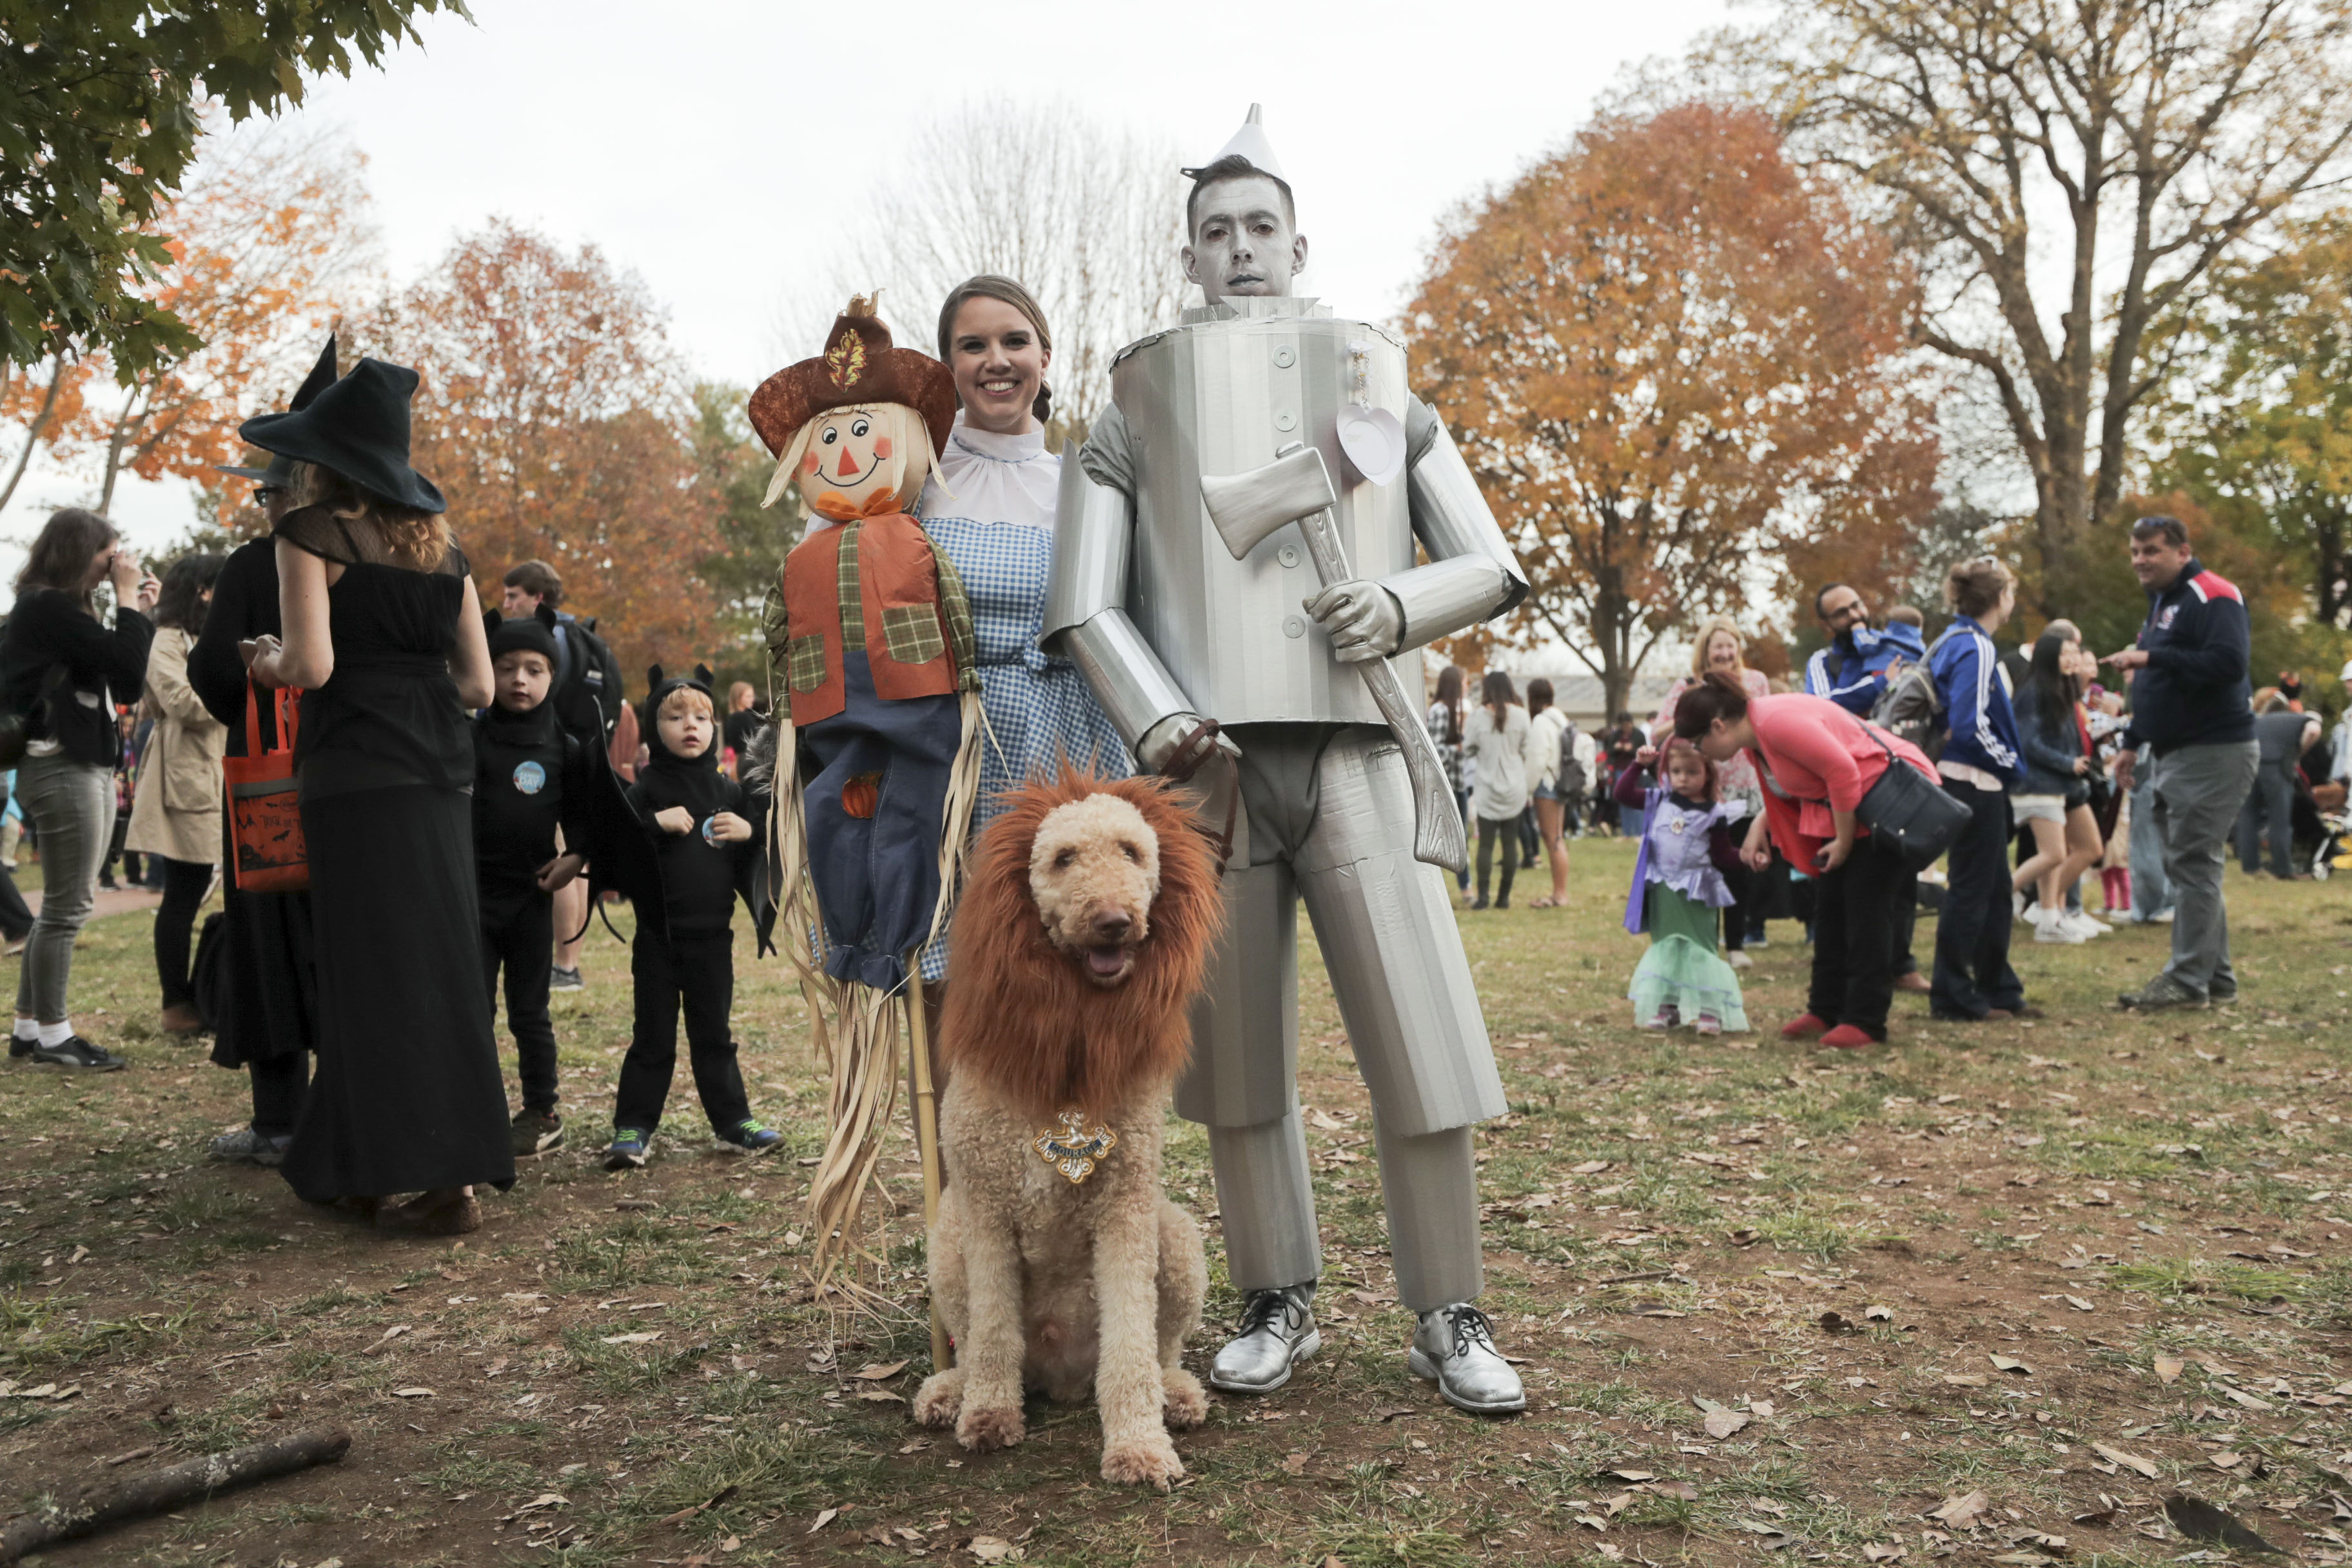 students dressed up as characters from Wizard of Oz with their dog